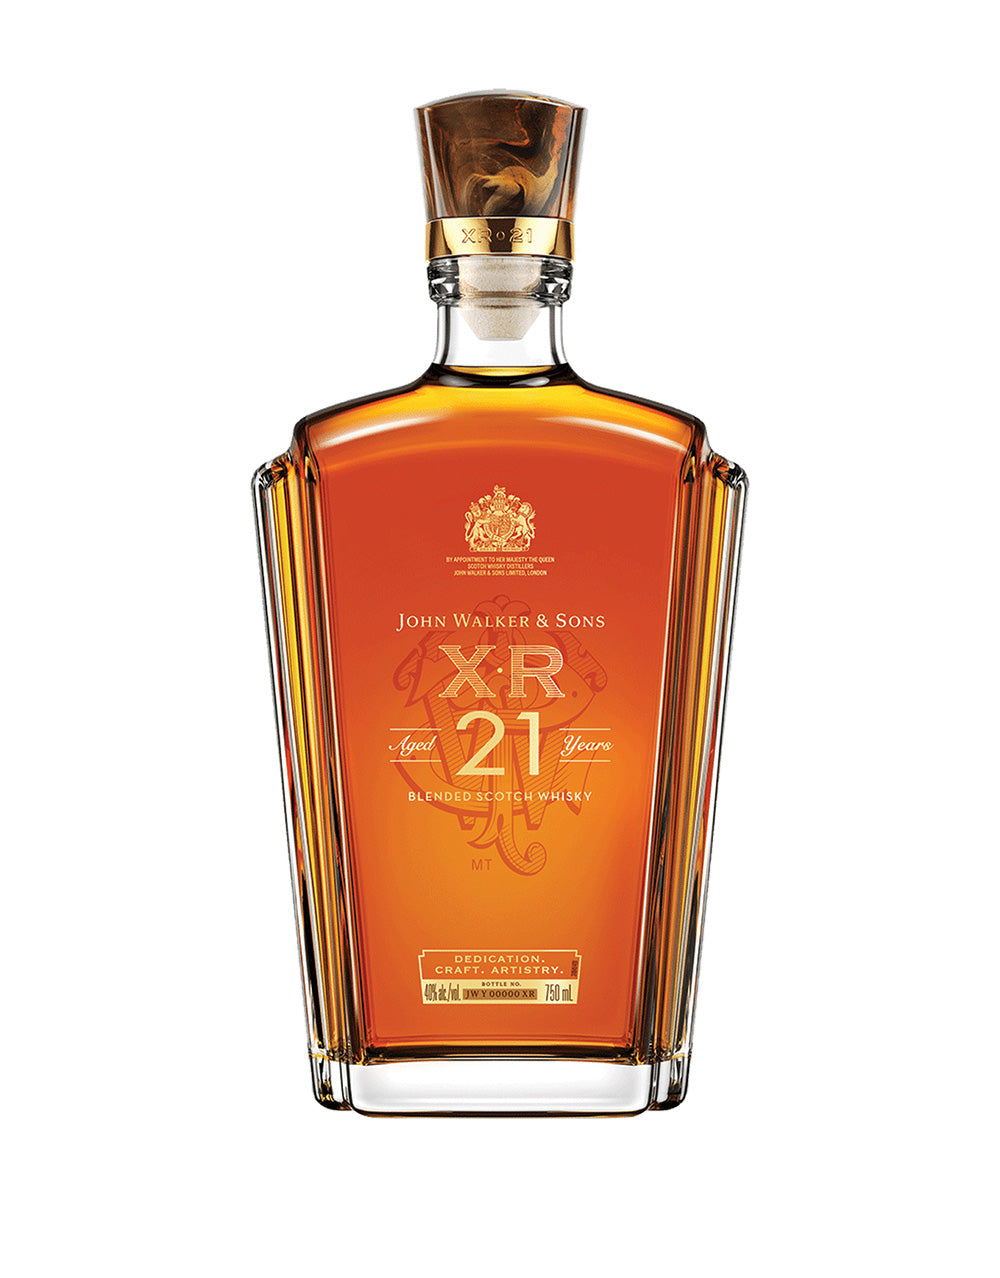 Impasse dichtheid Susteen Johnnie Walker & Sons™ XR Aged 21 Years Blended Scotch Whisky | ReserveBar